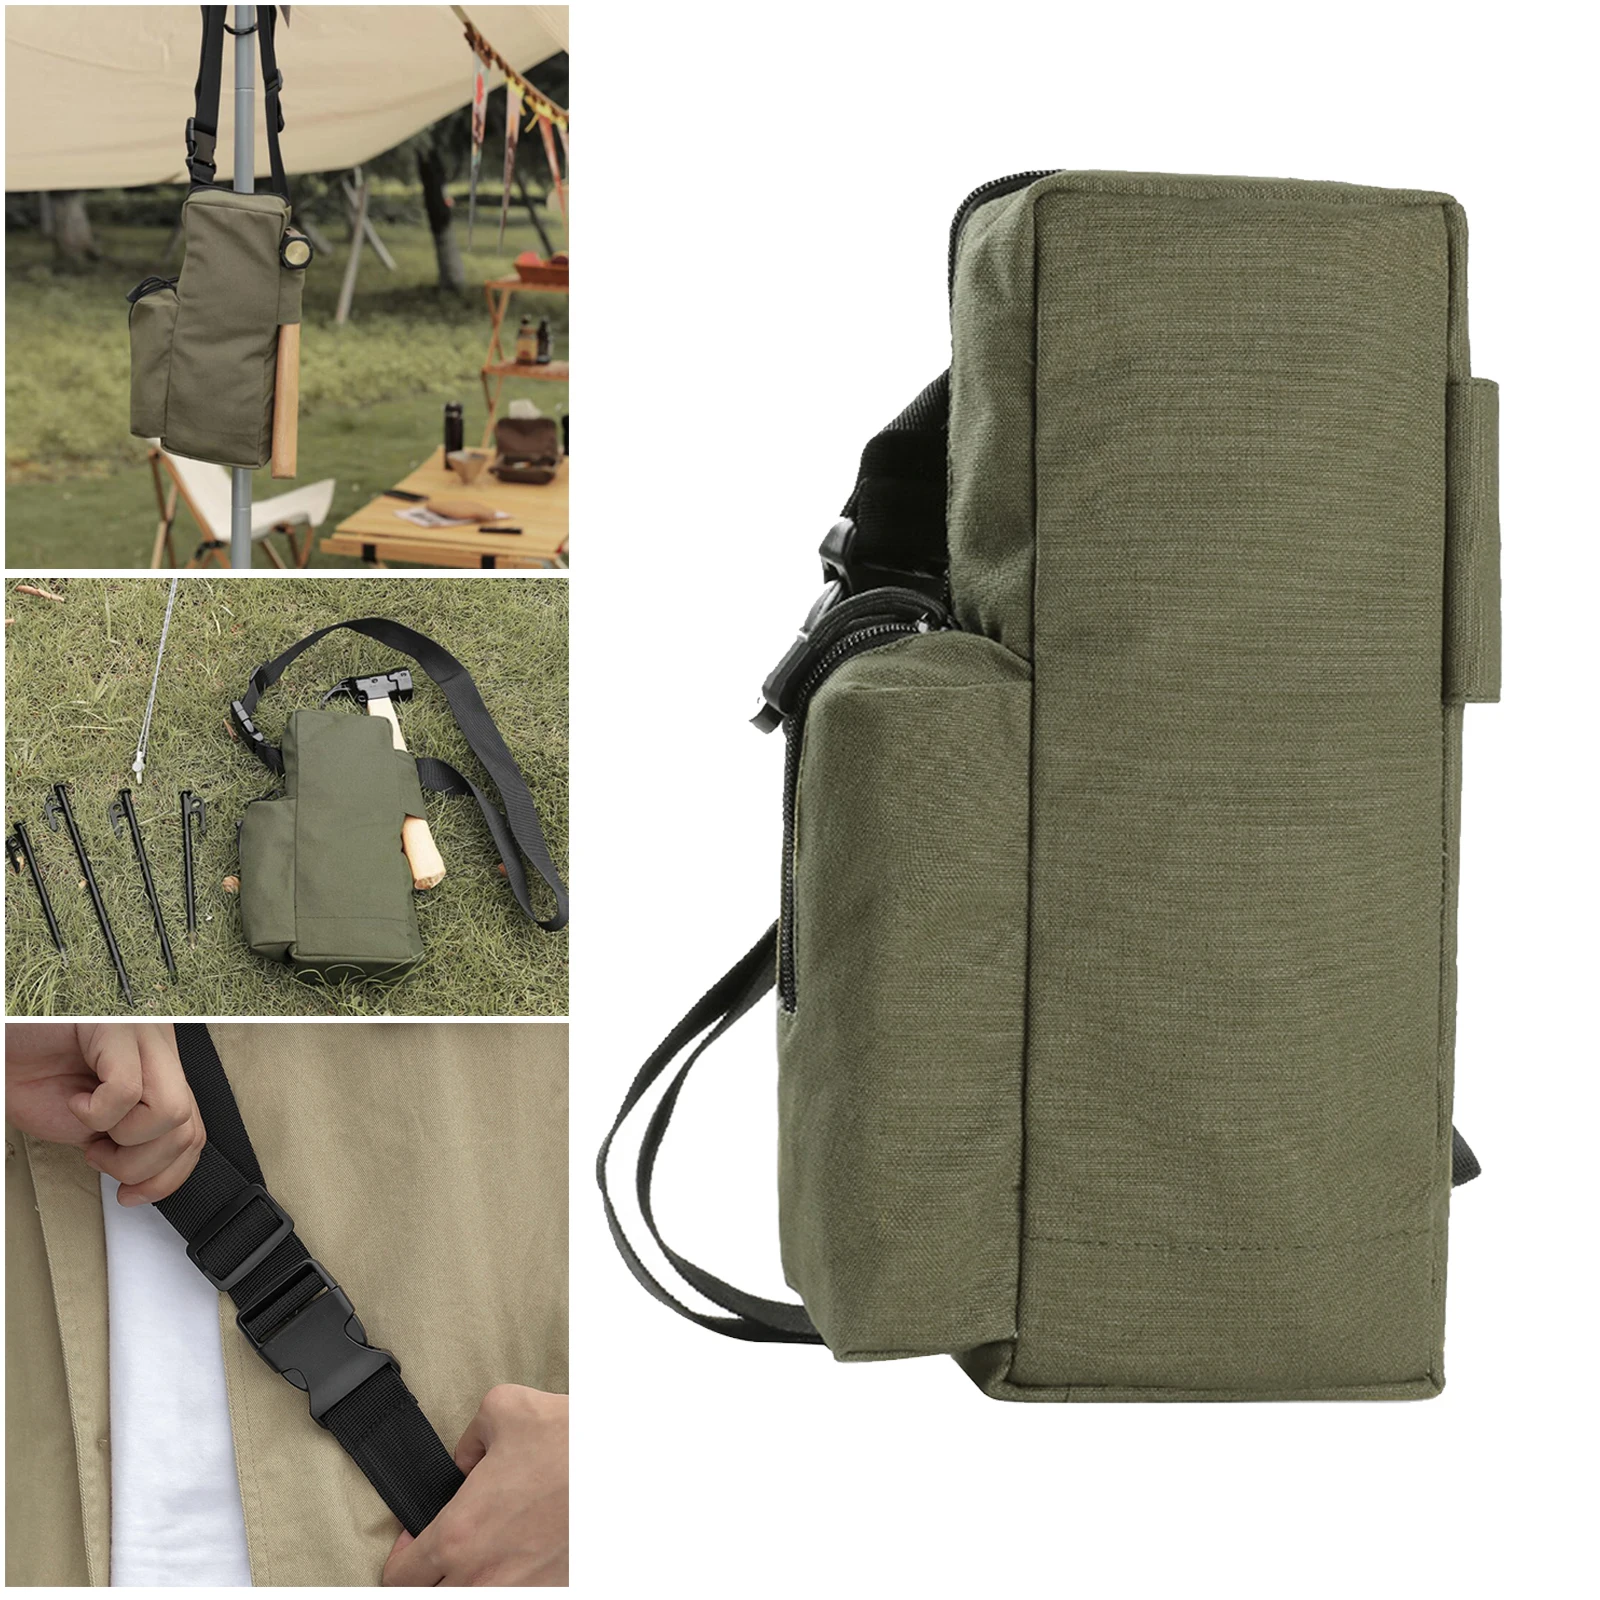 Portable Tent Peg Storage Bag Stakes Nails Organizer Pouch Camping Equipment